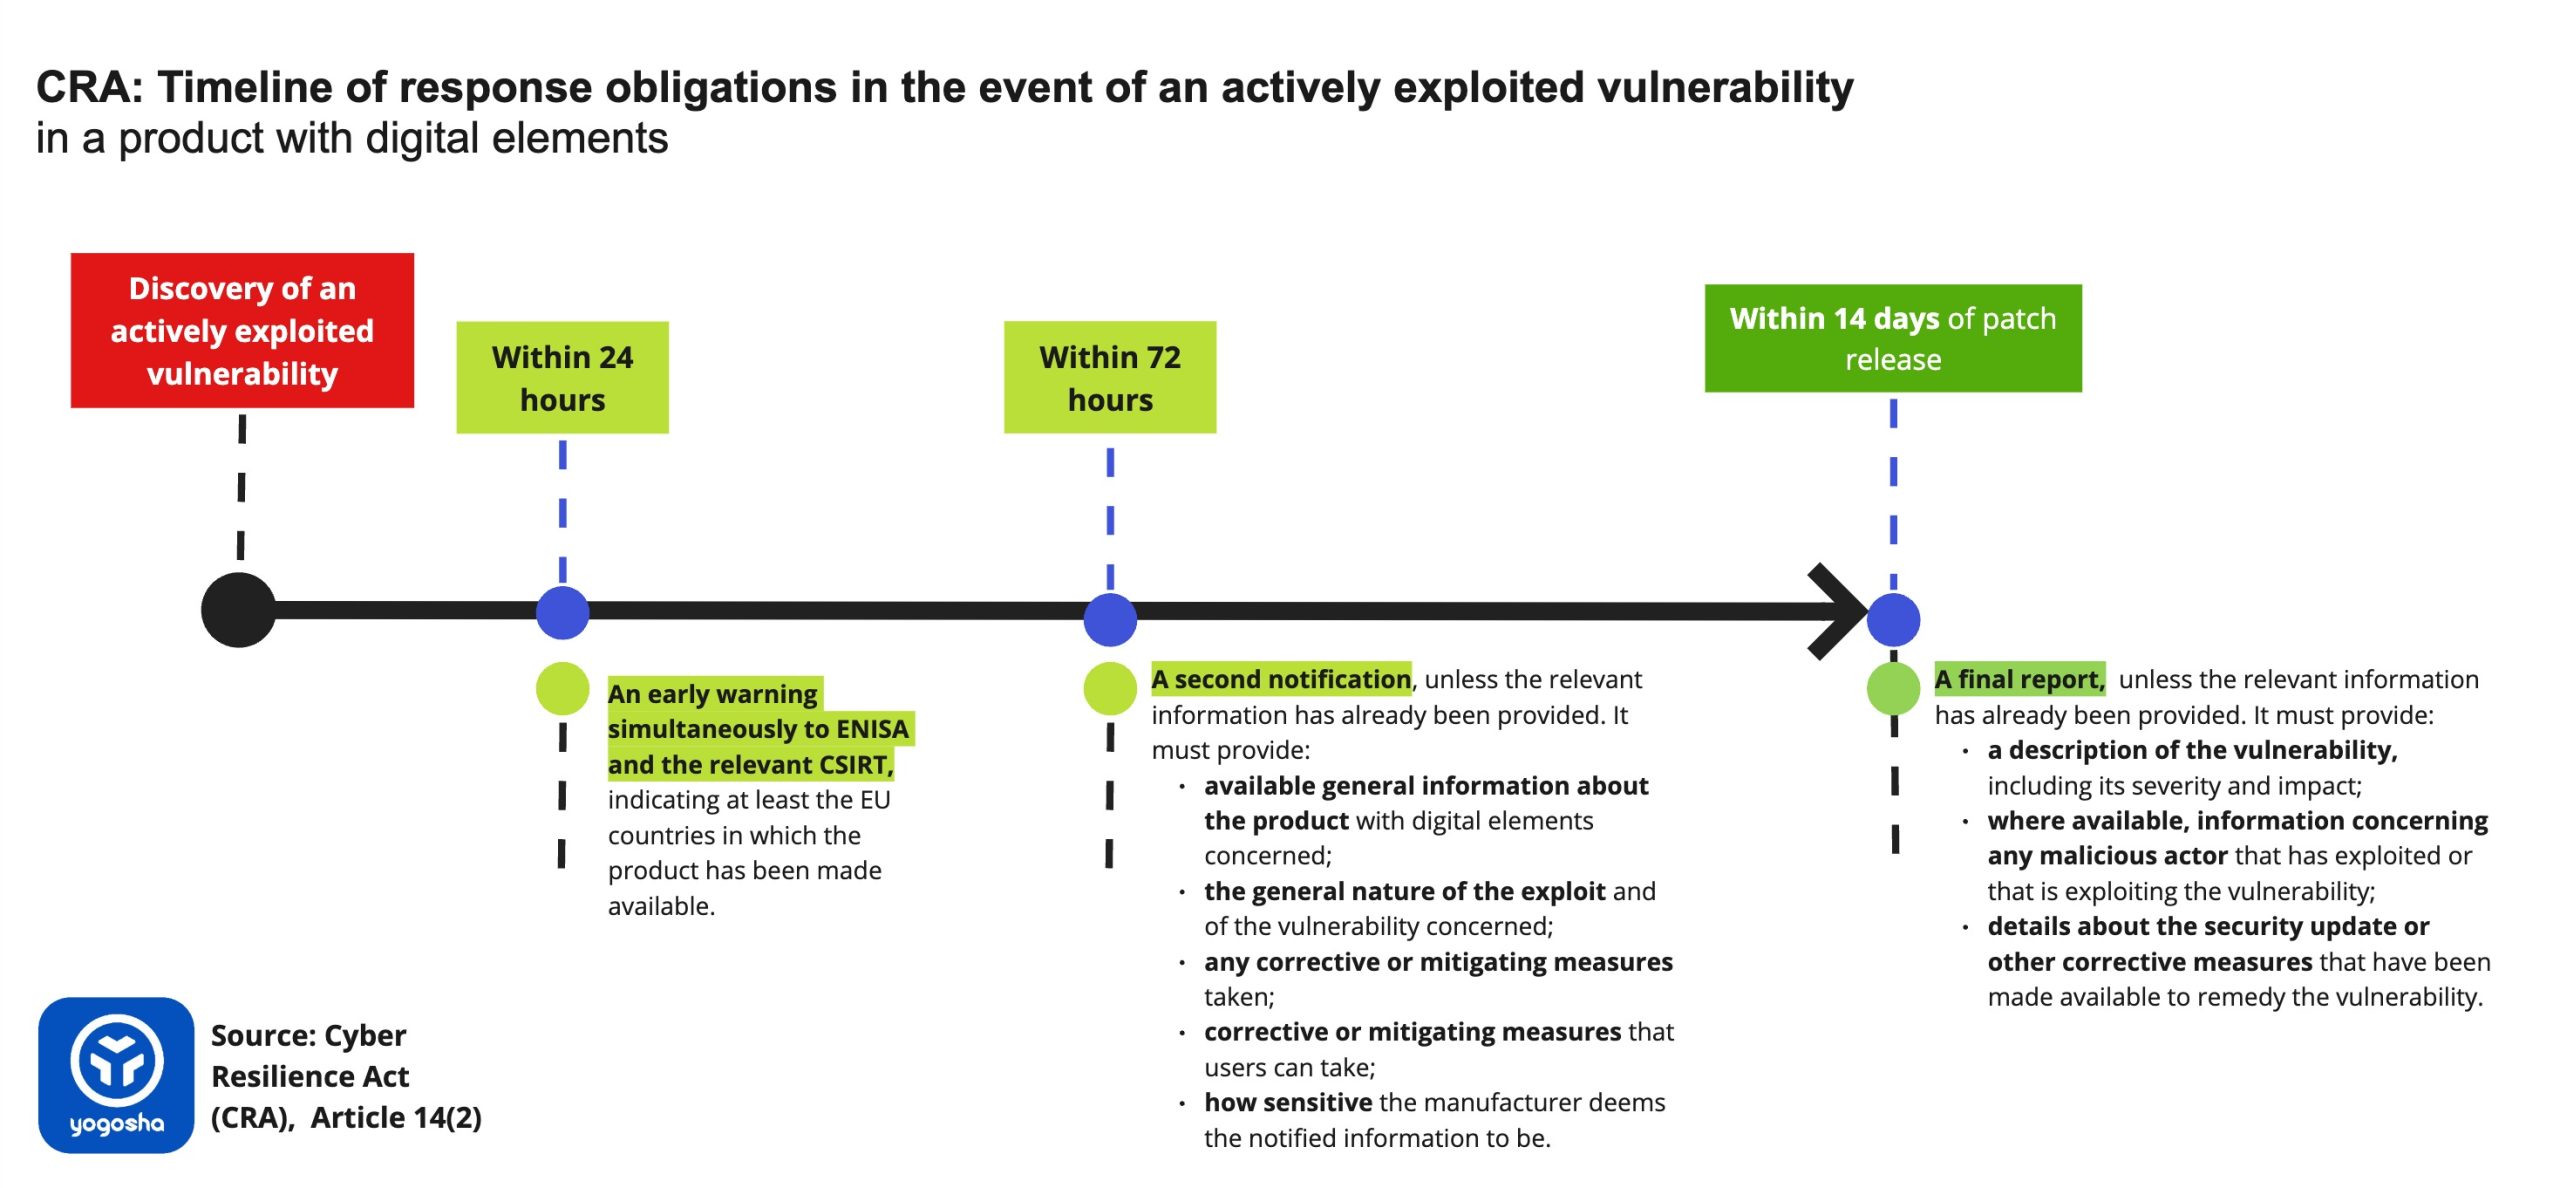 CRA - Timeline of response obligations in the event of an actively exploited vulnerability in a product with digital elements